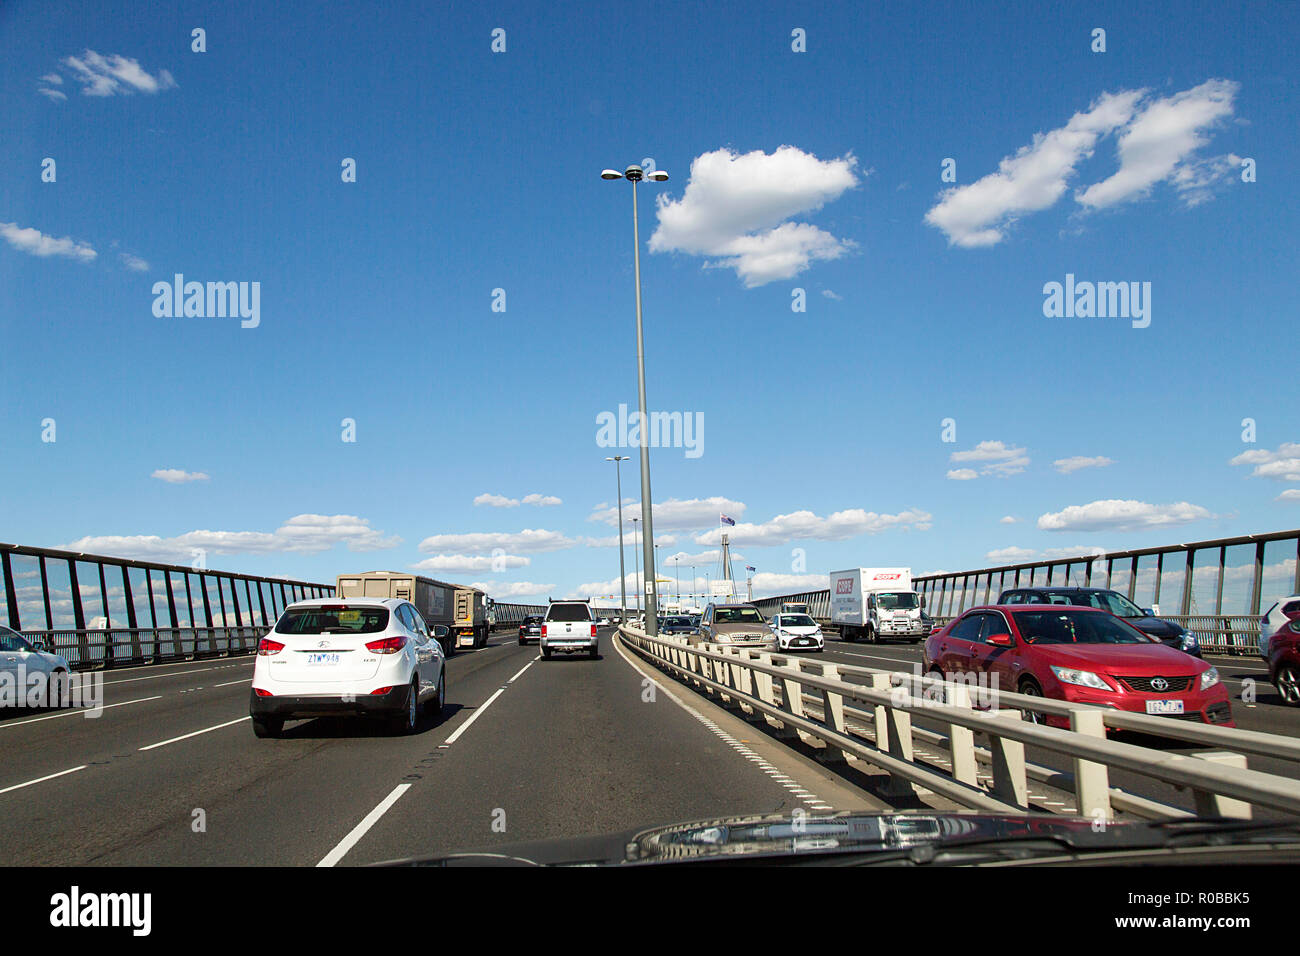 Melbourne, Australia: March 23, 2018: Leaving the M1 Freeway in Melbourne to travel towards the St Kilda area. Road signs and traffic with a blue sky. Stock Photo